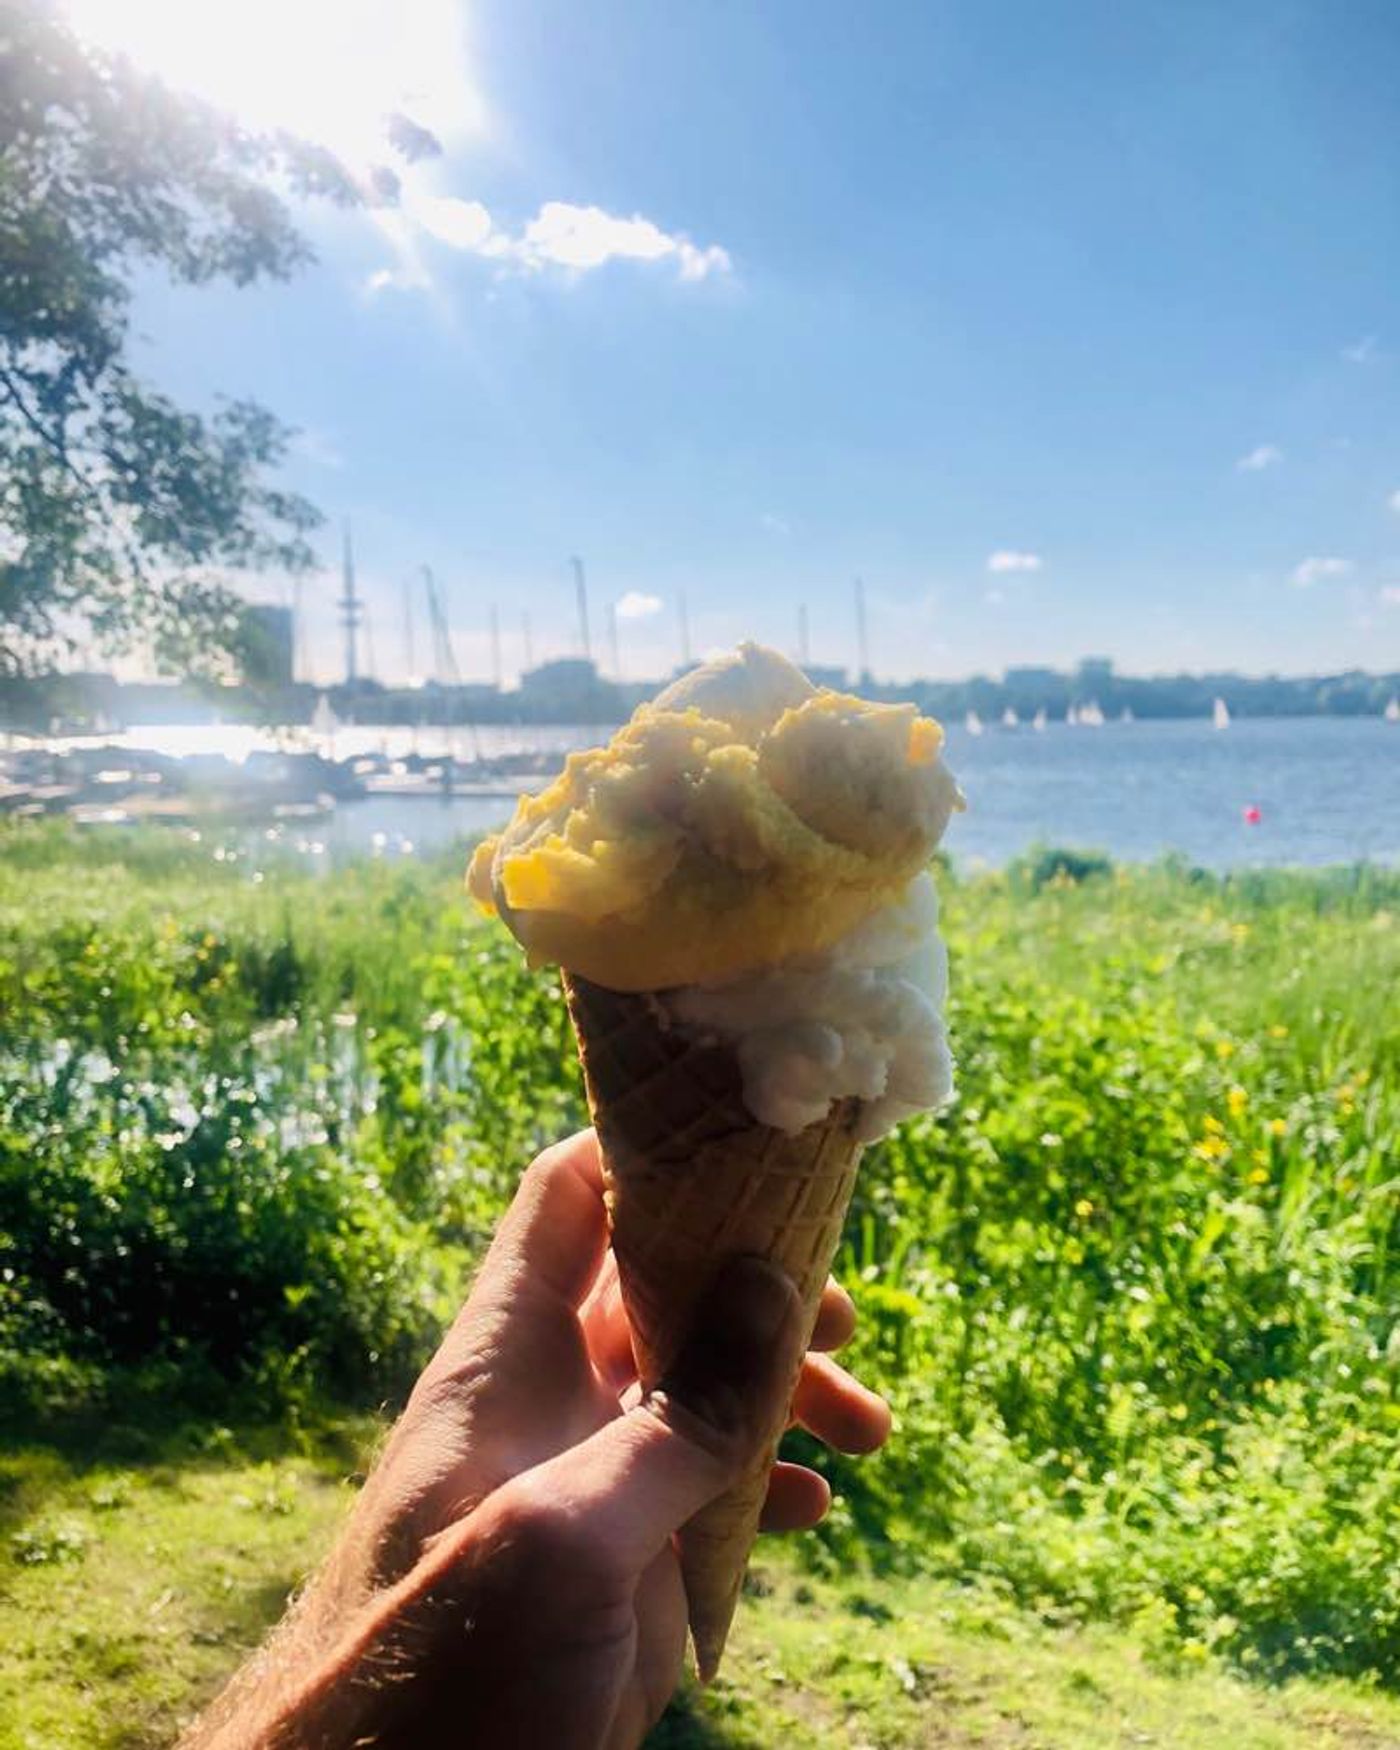 Ice cream with a view